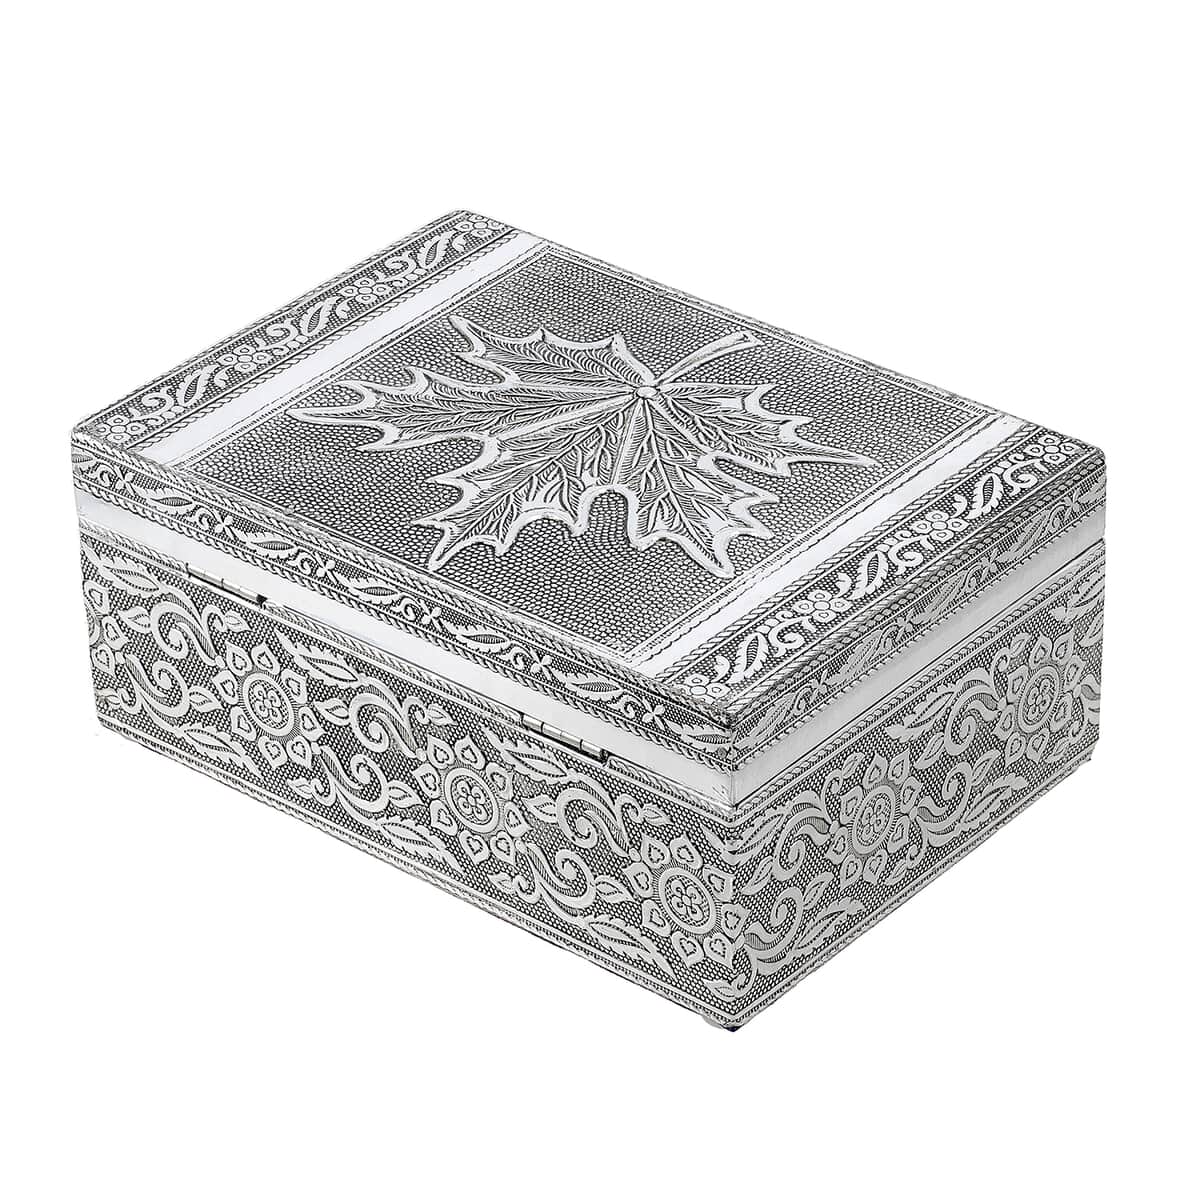 Aluminum Oxidized Maple Leaf Pattern Jewelry Box with Tray (7x5 in) image number 4